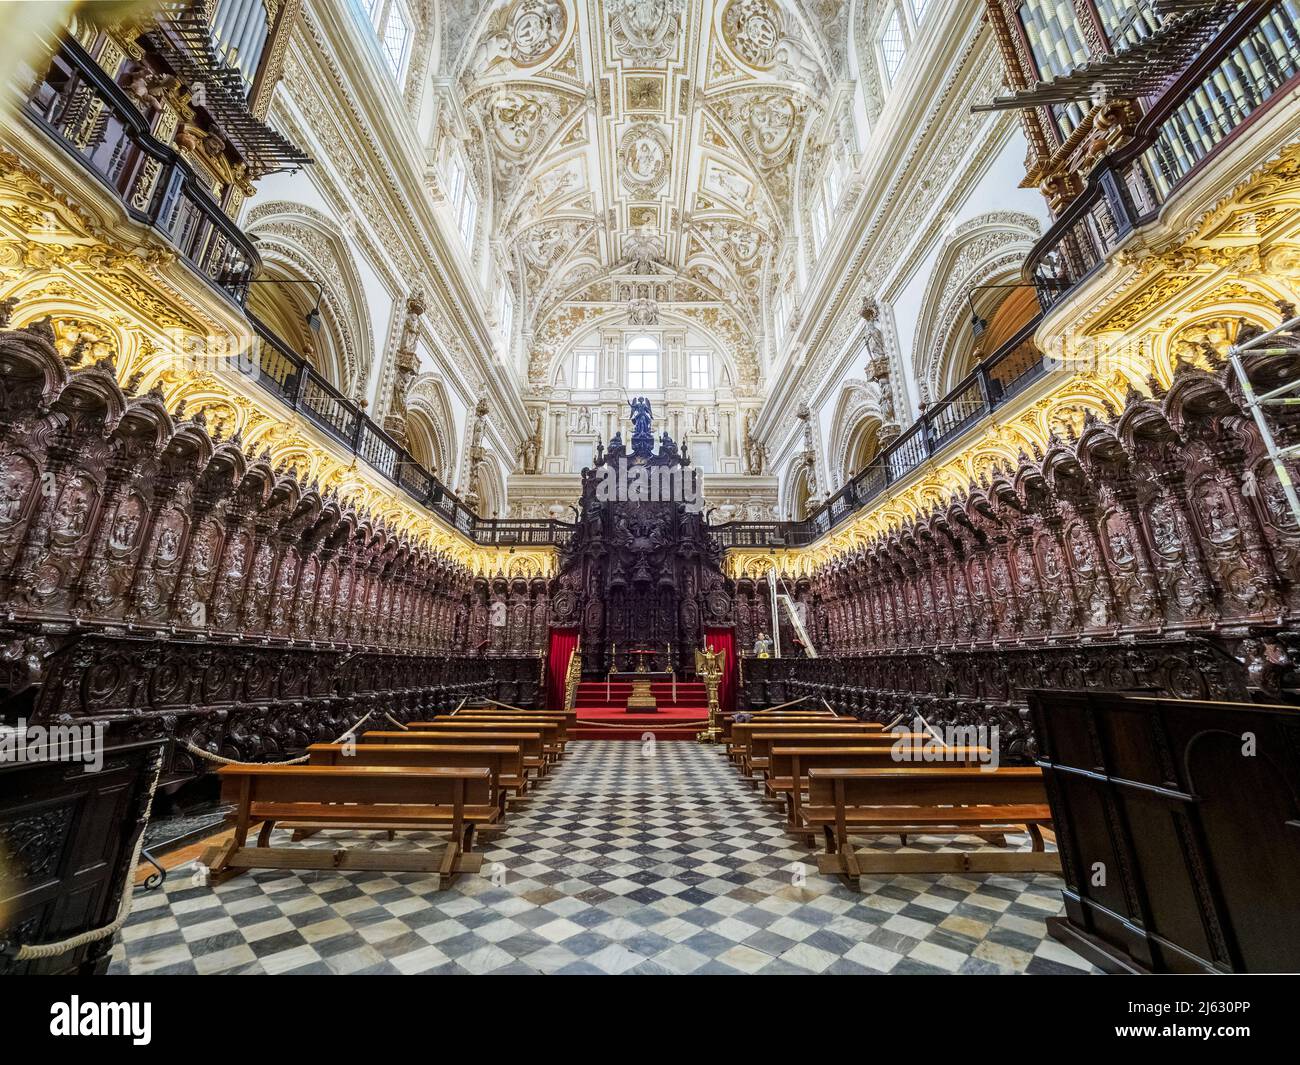 Choir stalls  in the  Mezquita-Catedral (Great Mosque of Cordoba) -  Cordoba, Spain Stock Photo